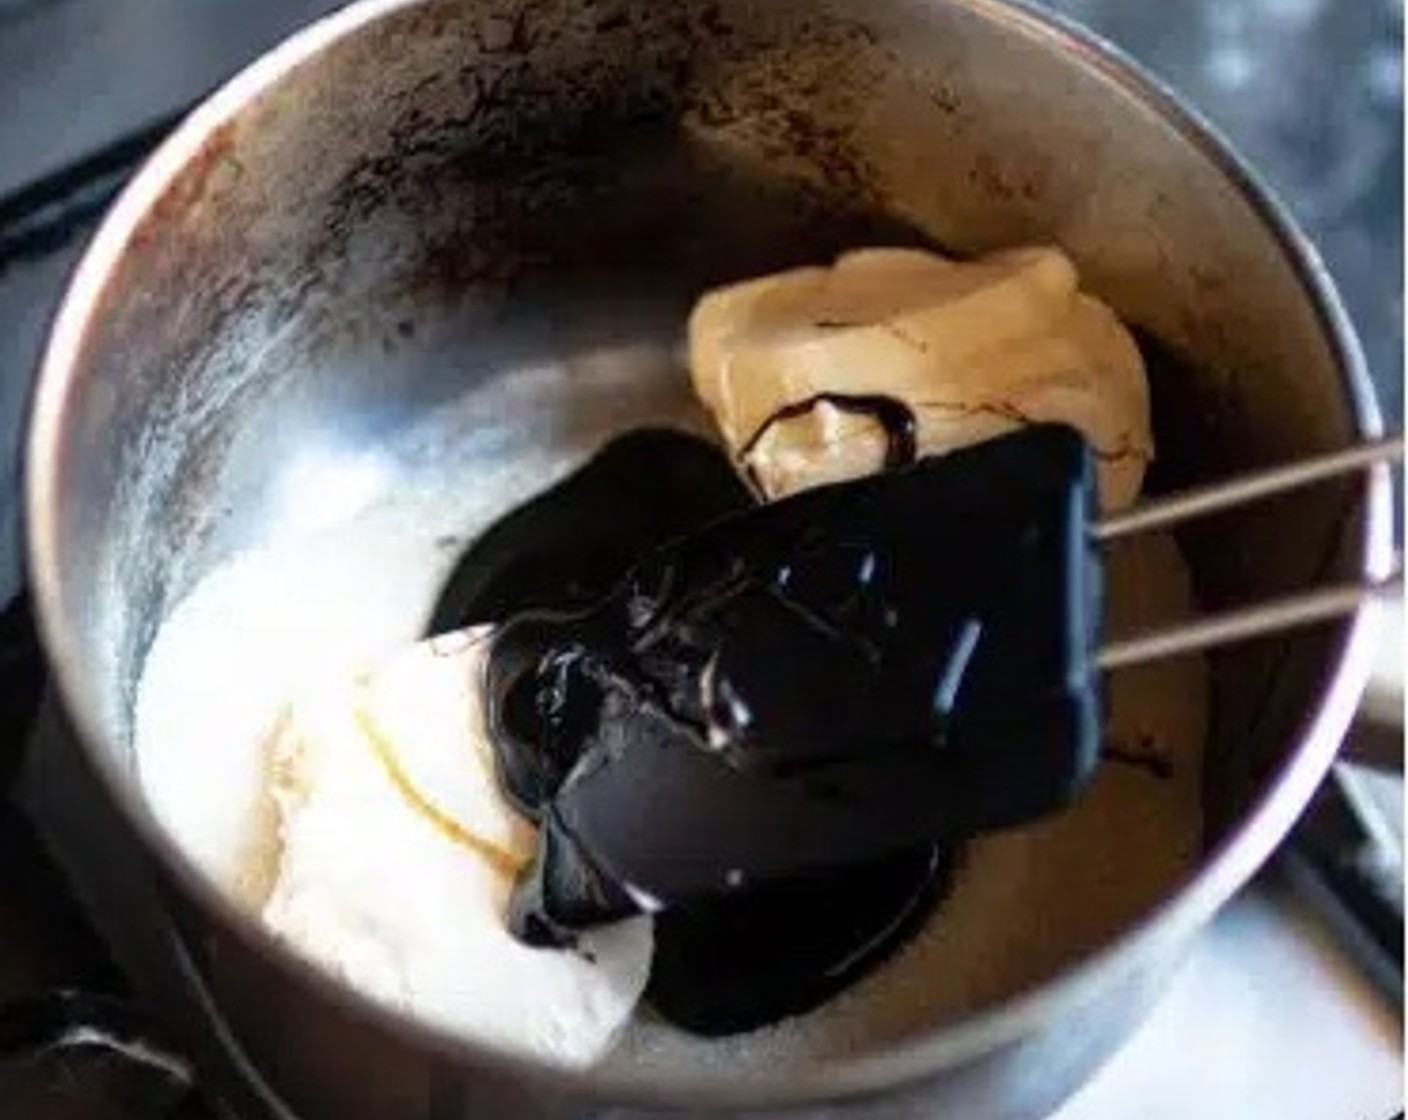 step 2 Heat the Vegan Butter (1/2 cup), Brown Sugar (1/2 cup), Golden Syrup (2 Tbsp), and Black Treacle (3 Tbsp) in a saucepan over low heat, stir gently until the mixture has completely melted. Leave to cool for 5 minutes.